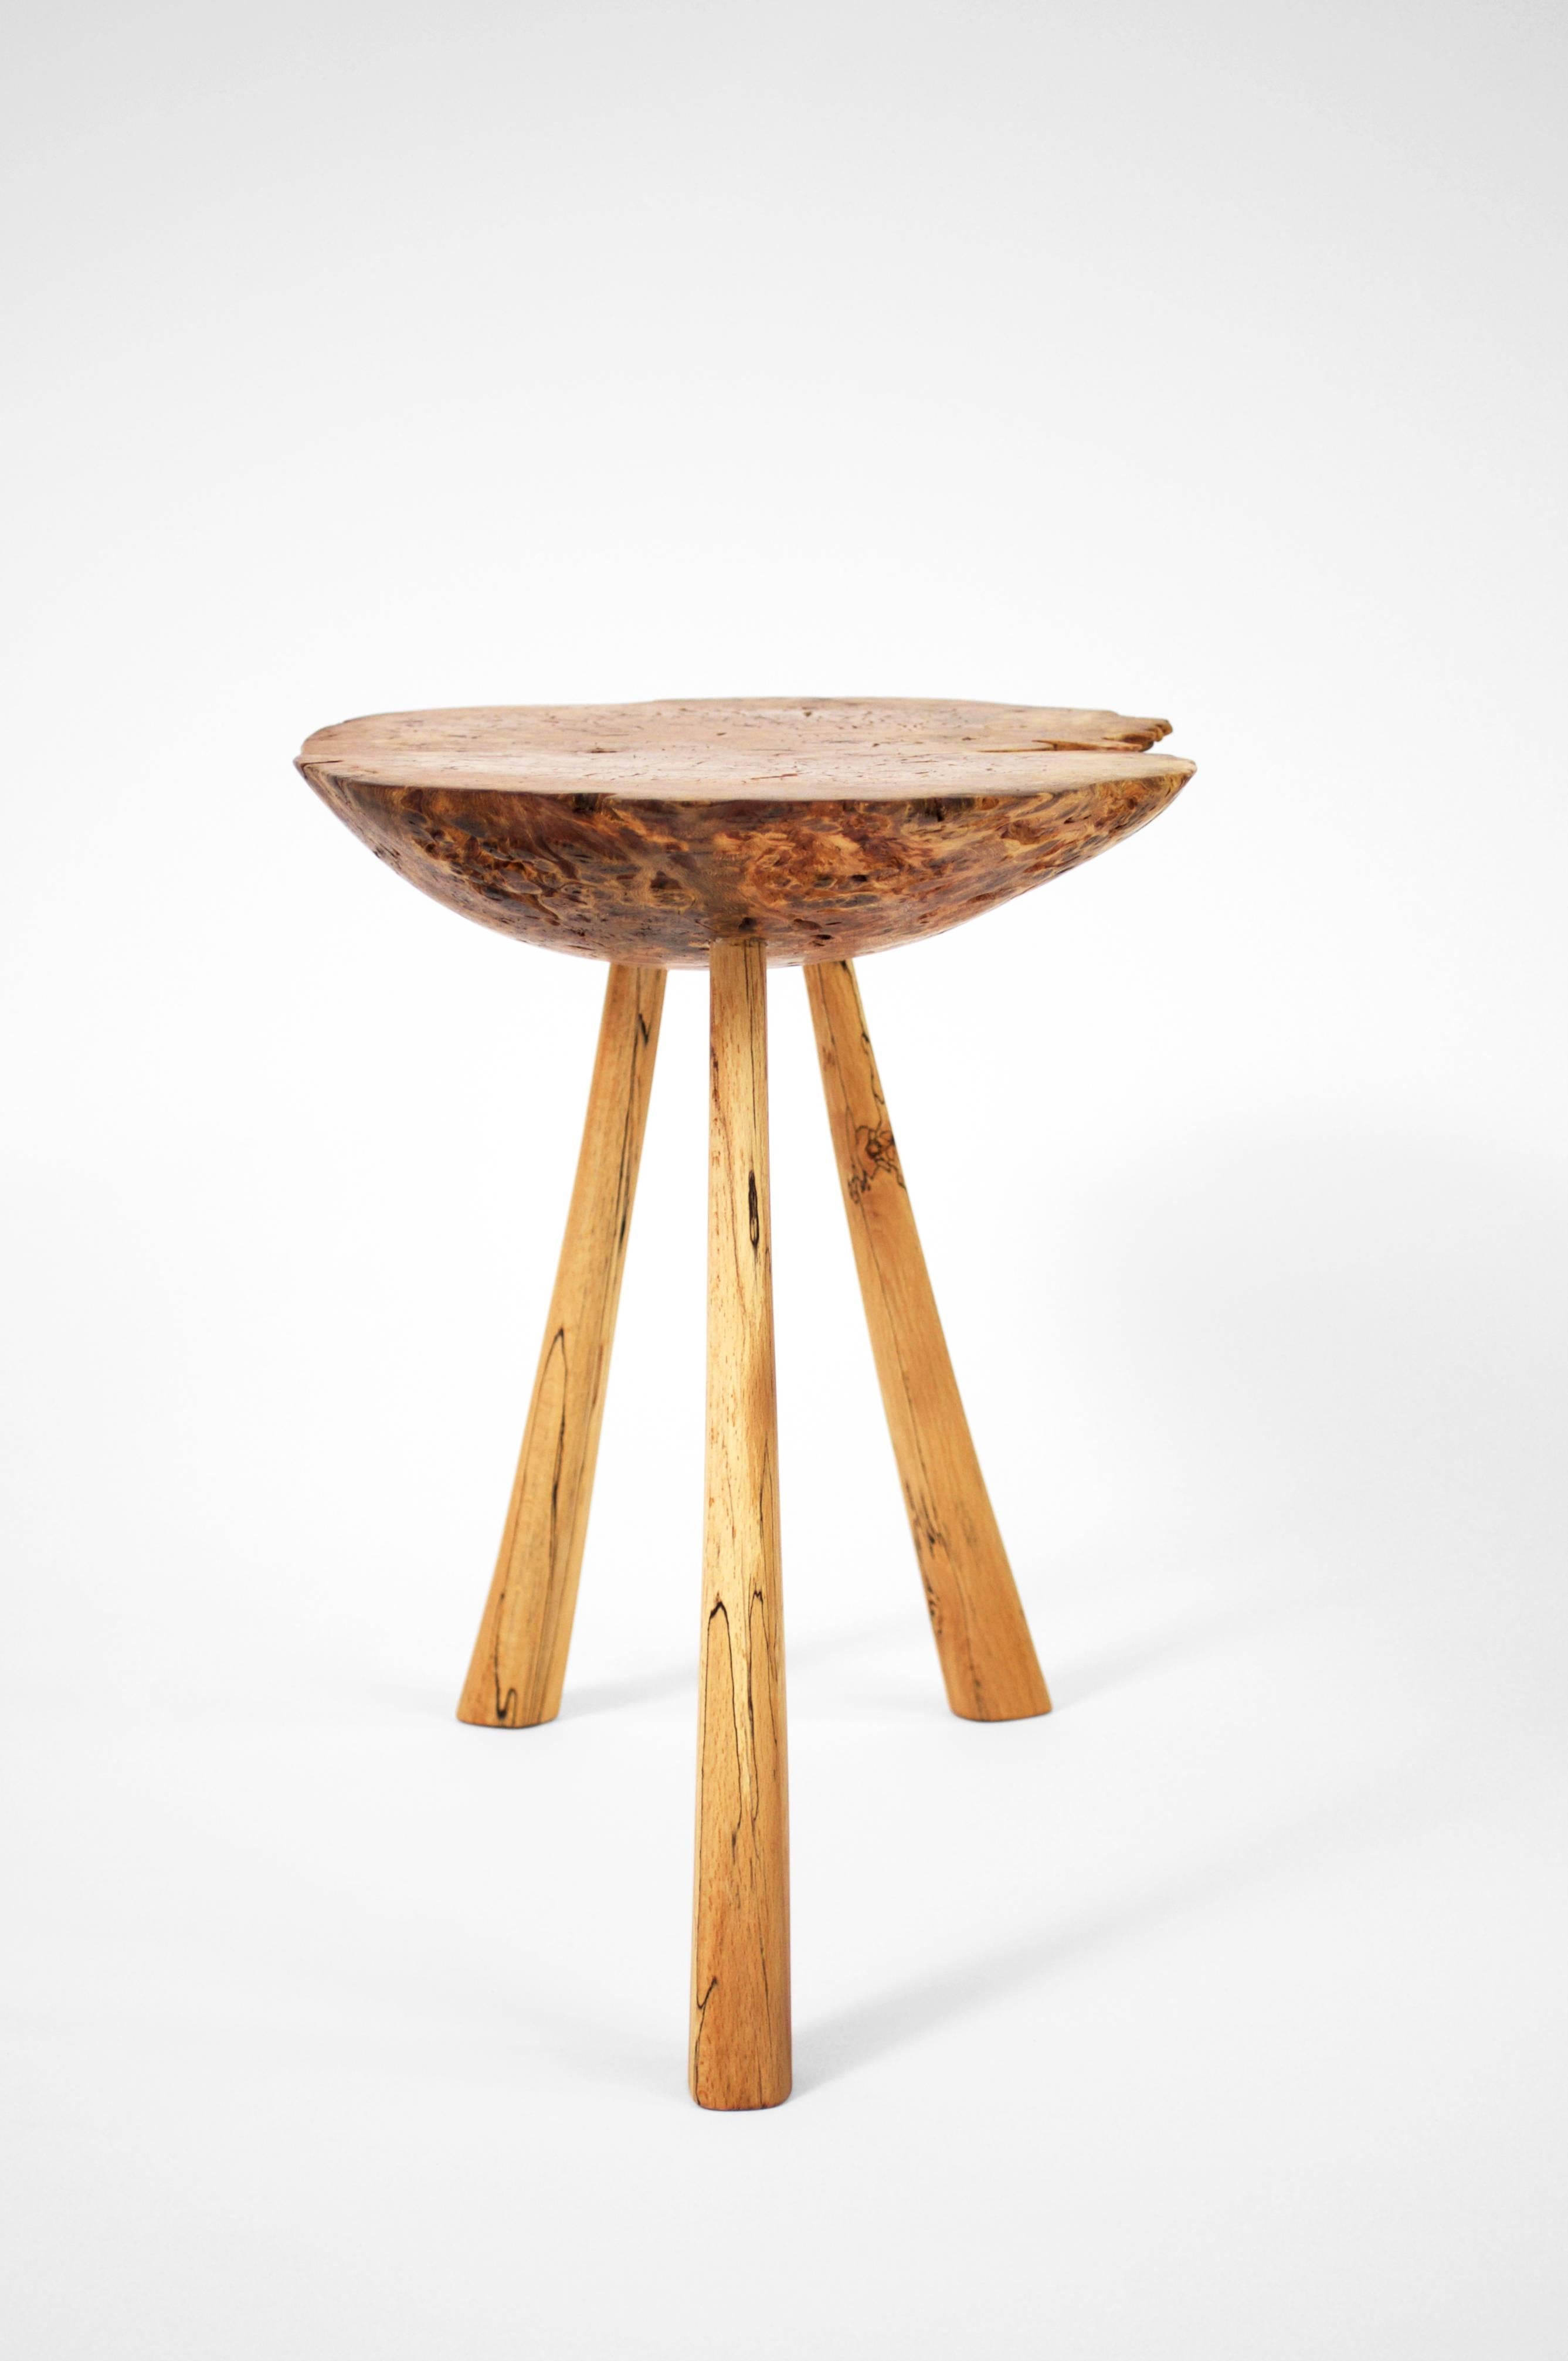 Unique signed table by Jörg Pietschmann
Table · Oak burl, beech
Measures: H 44 x W 75 x D 34 cm tabletop 9 cm
Side piece of an old oak with exceptional burl on colorful legs. Polished oil finish.


In Pietschmann’s sculptures, trees that for